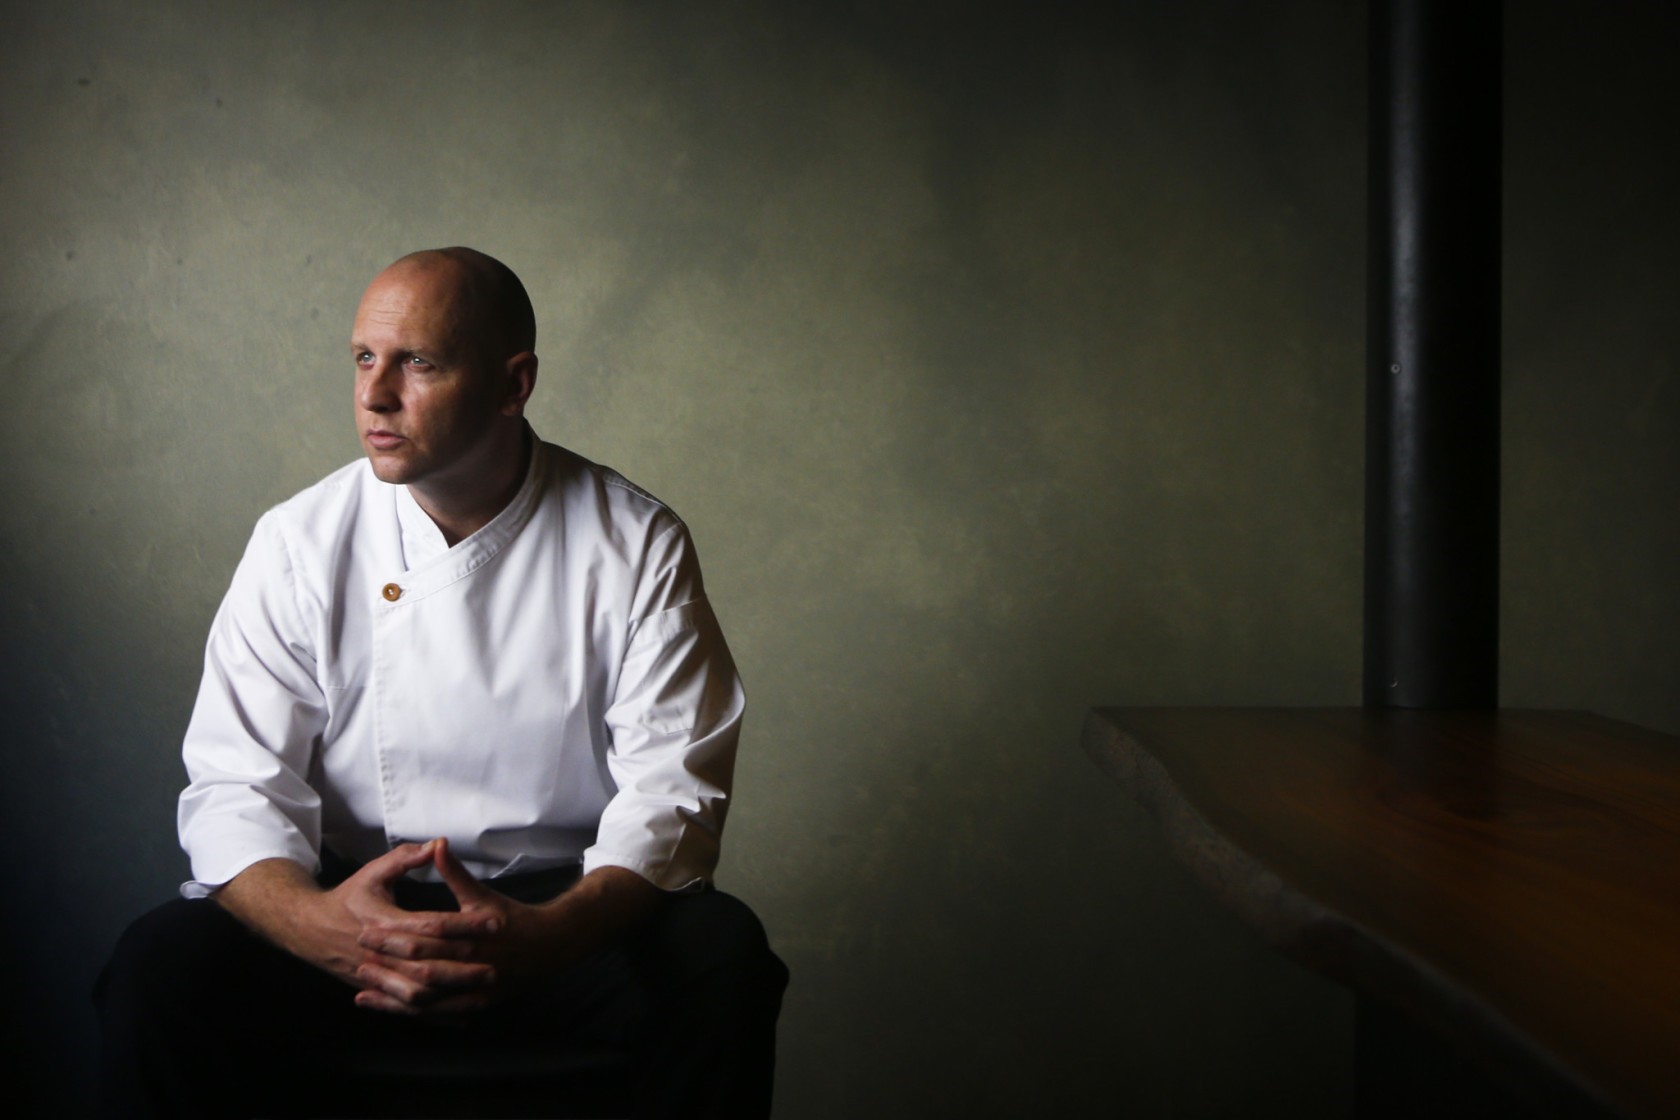 A chef looks out of a window while wearing whites in a semi-dark room.